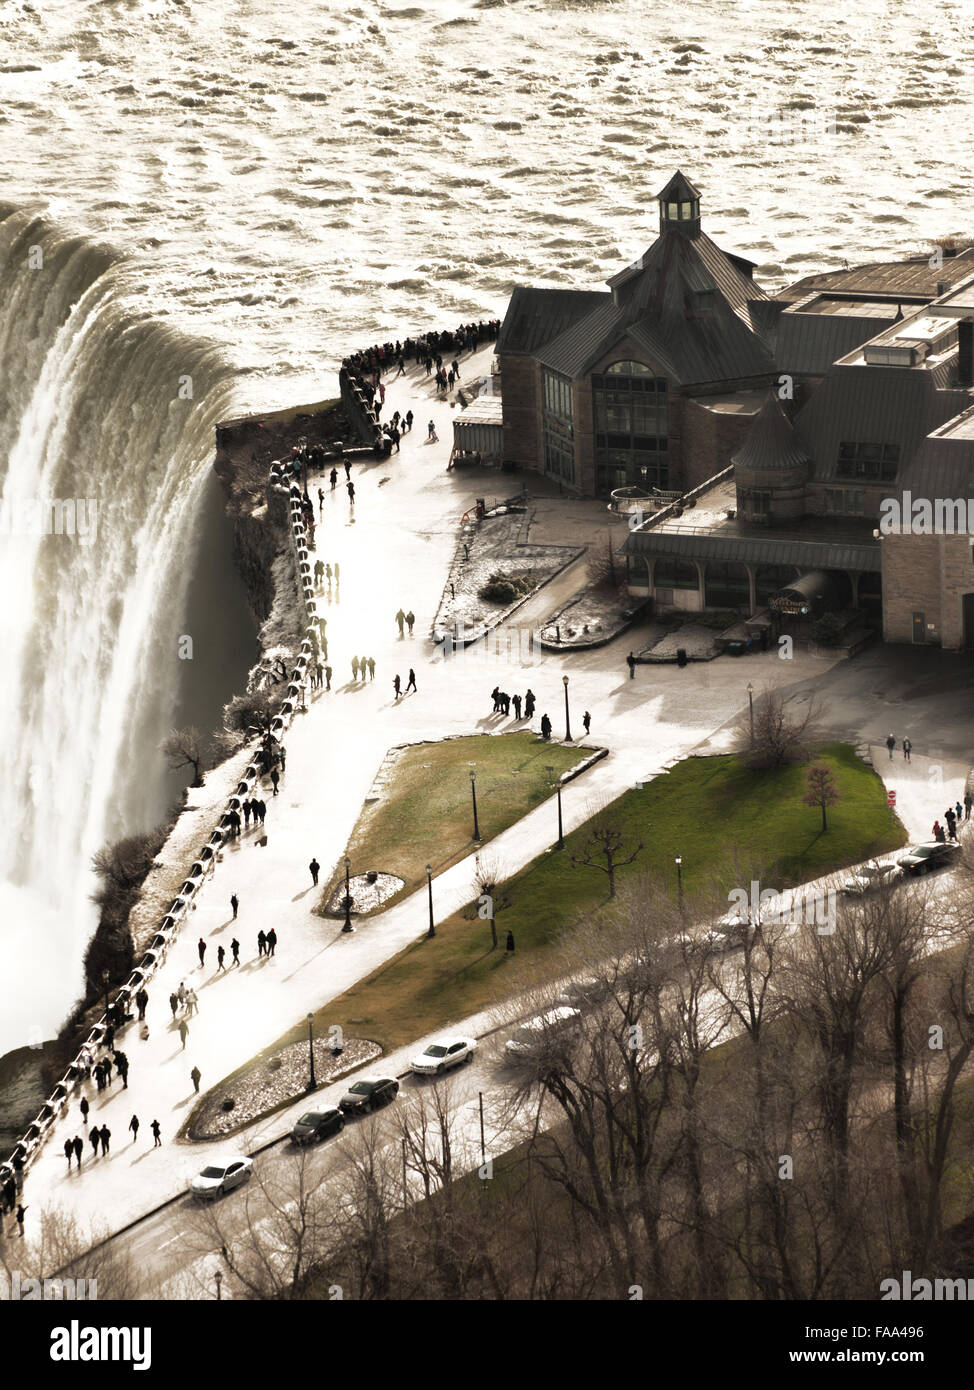 Tourists at Niagara Falls in winter, New York side Stock Photo